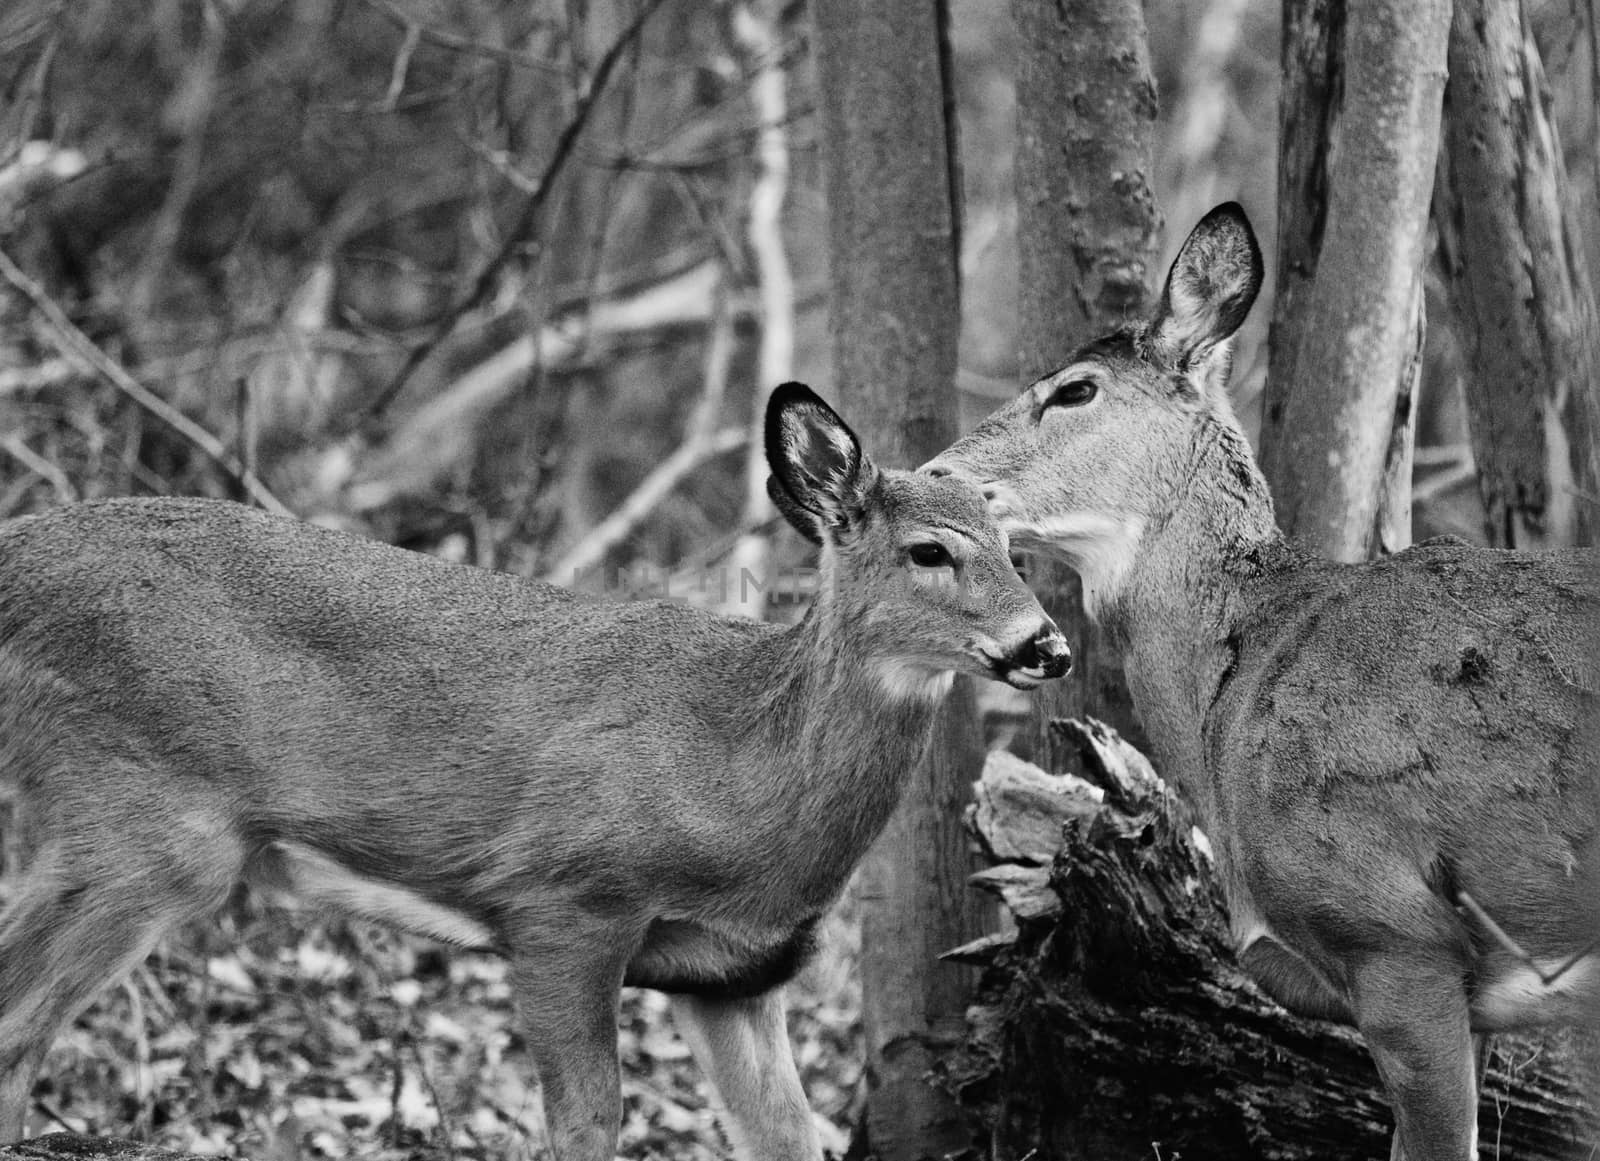 Beautiful black and white image with the deers in love